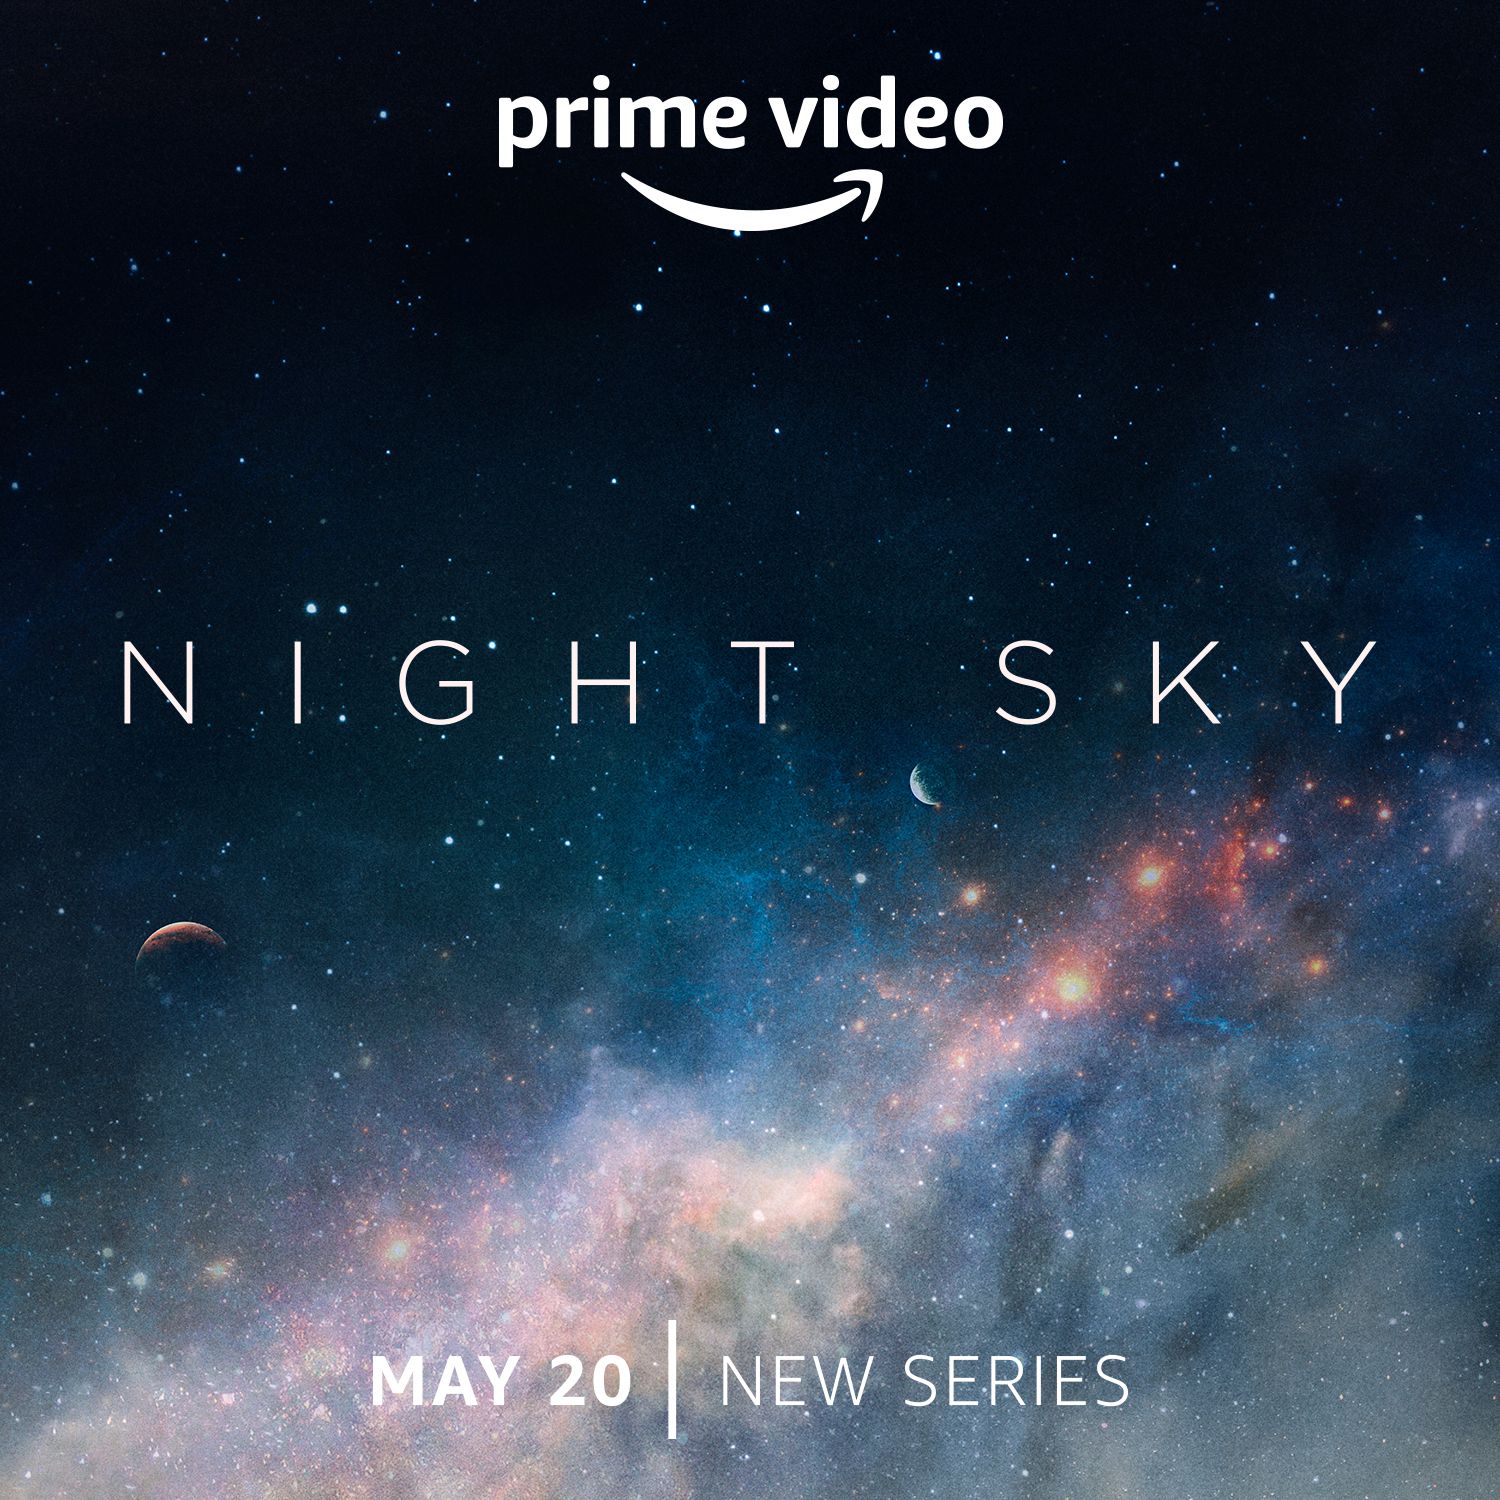 Night Sky: Release Date, Plot, Trailer, Cast, and Everything We Know So Far